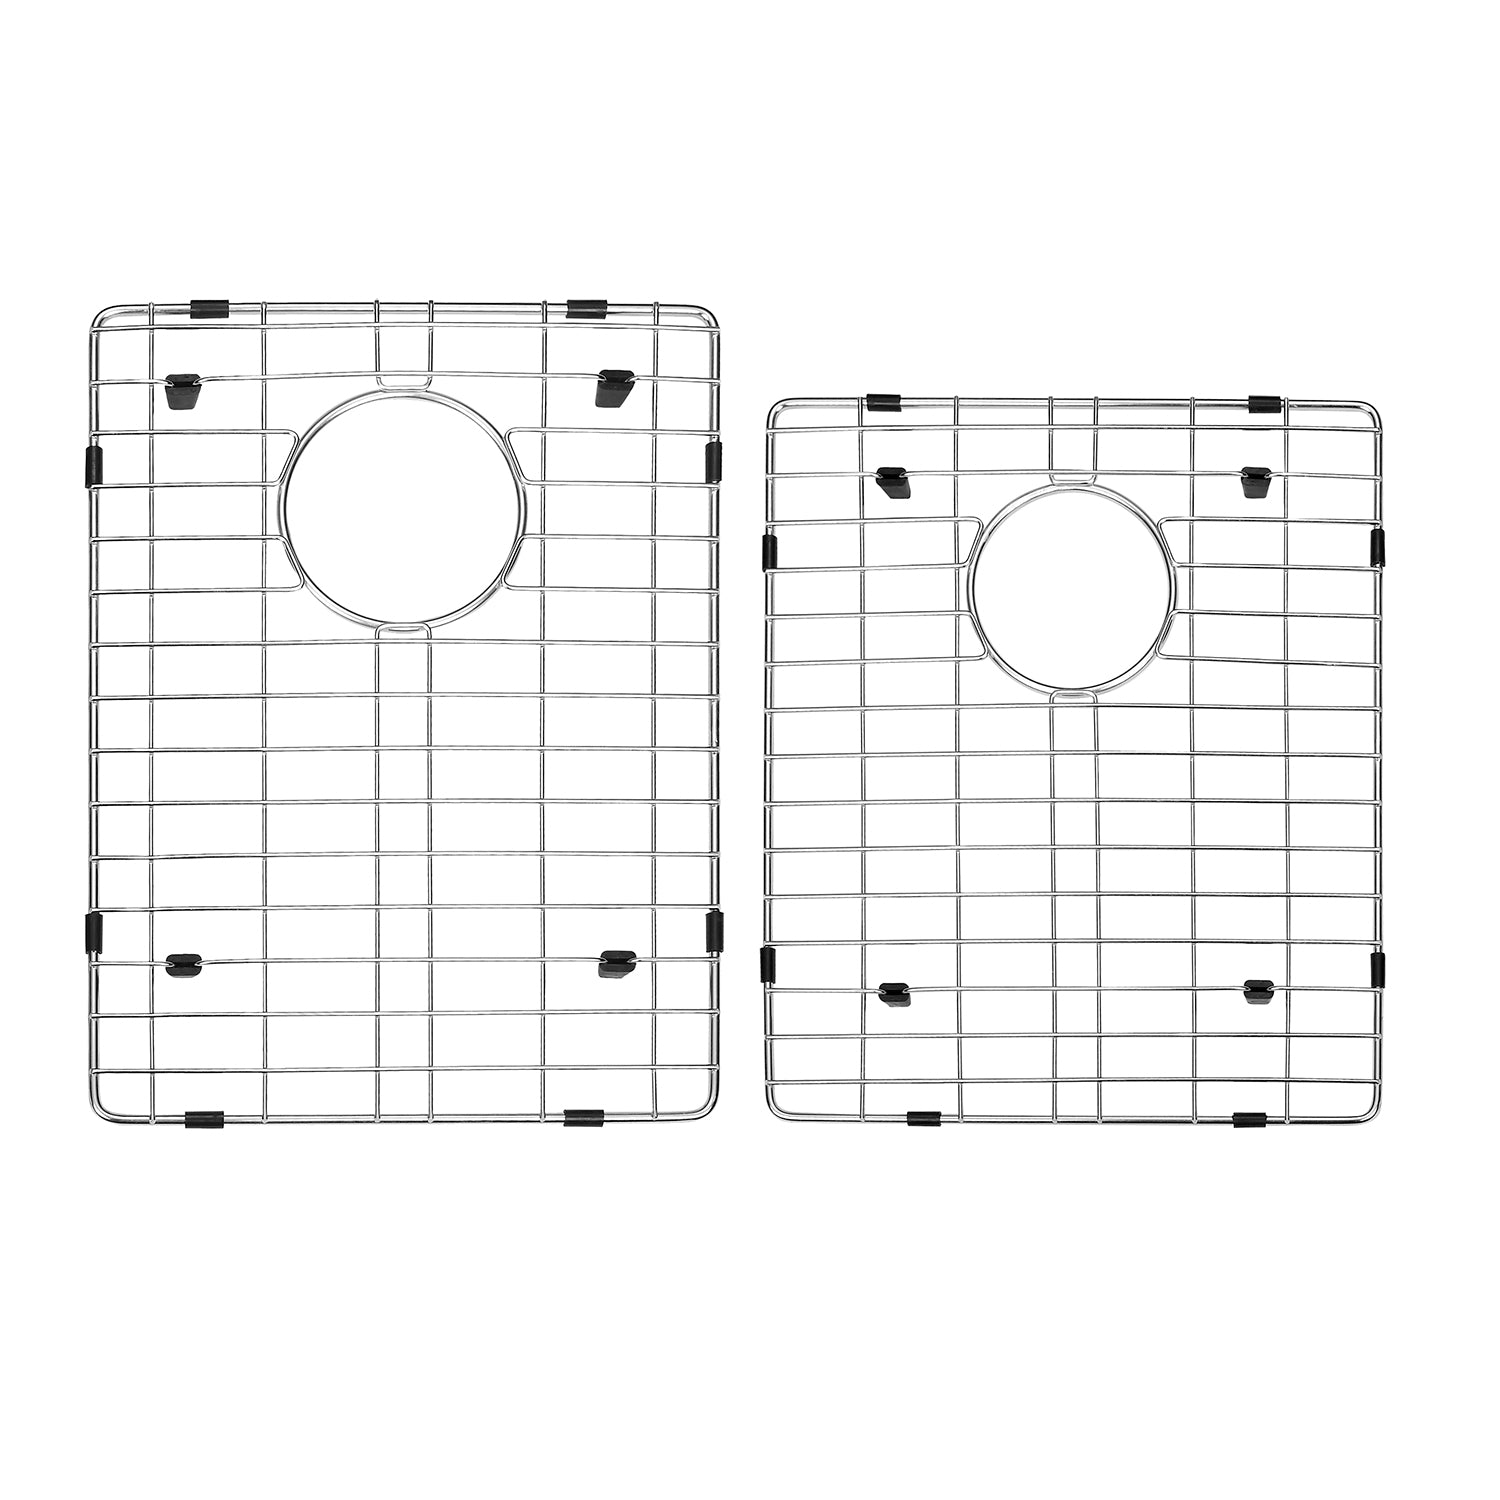 DAX Grid for Kitchen Sink, Stainless Steel Body, Chrome Finish, Compatible with DAX-3120B, 17-1/2 x 13-3/4 Inches (GRID-3120B)